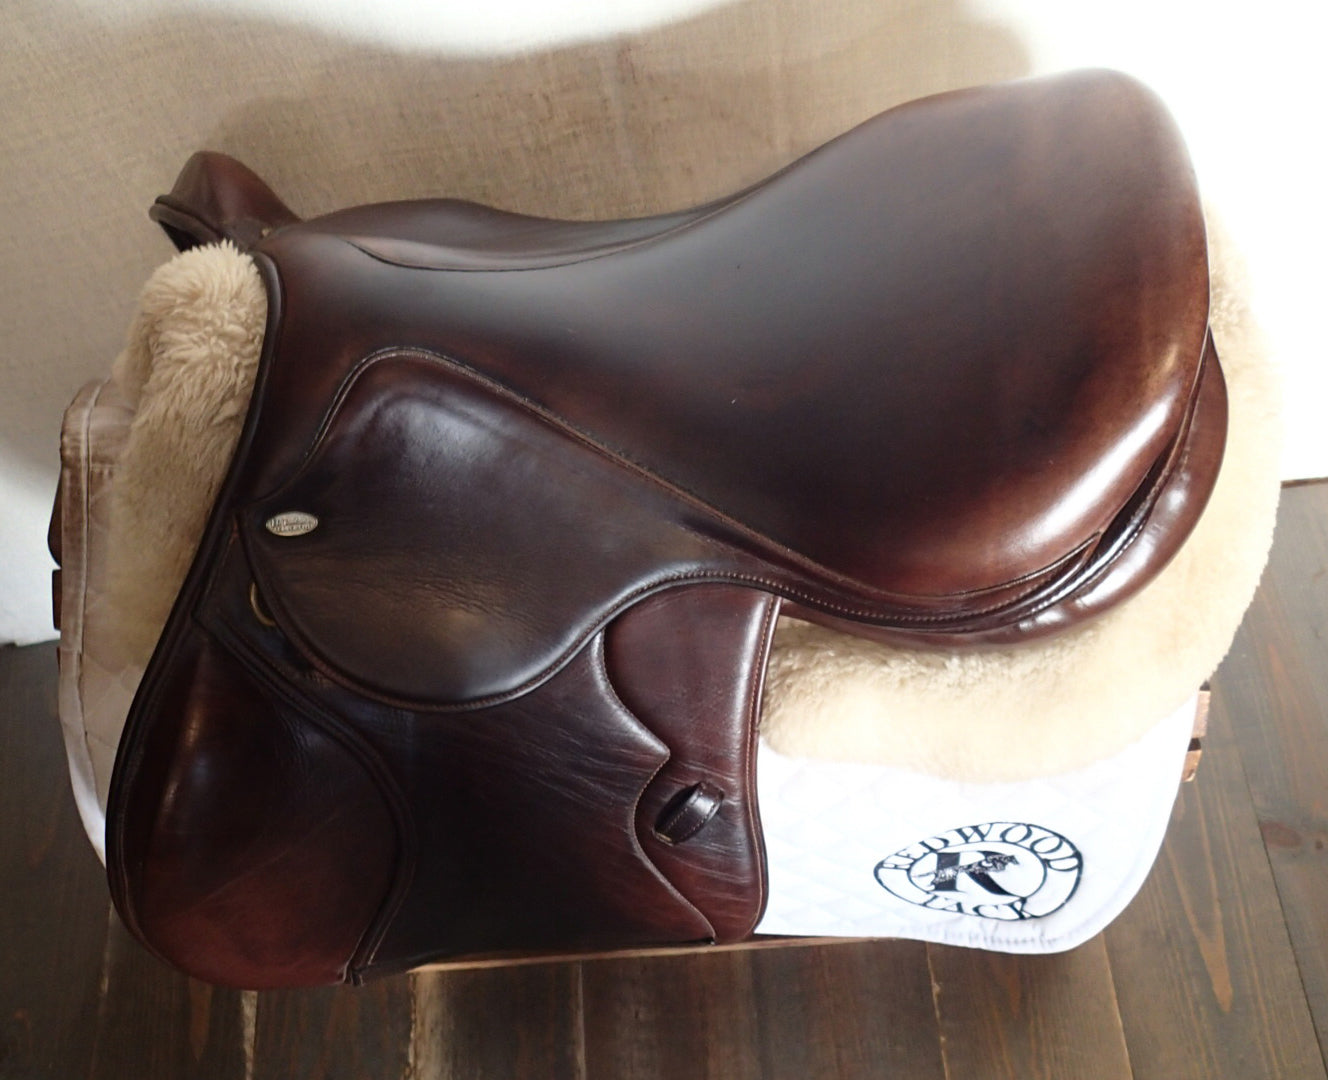 17" M. Toulouse Maxinne Comfort Fit Saddle - 5" dot to dot